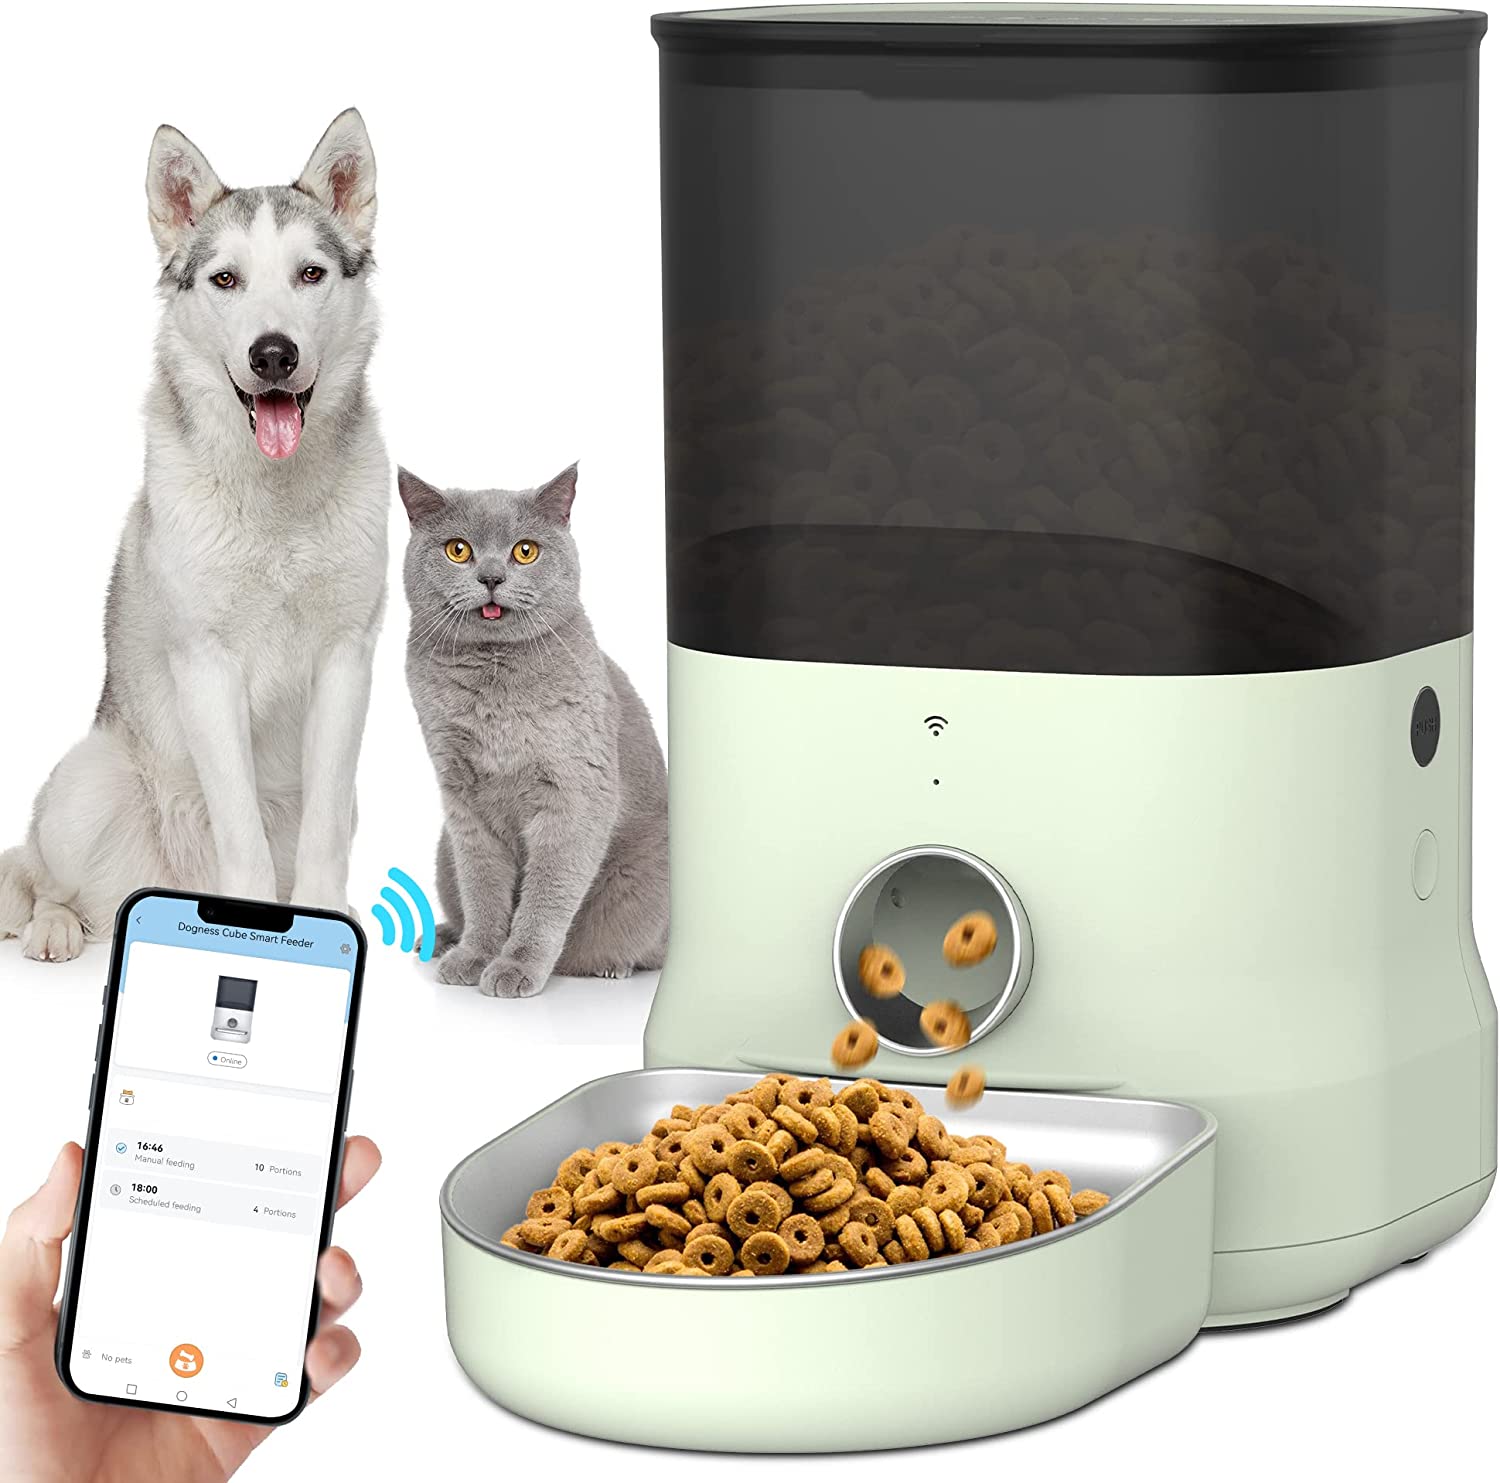 Automatic Pet Feeder Smart Food Dispenser Dogs - 6l Large Capacity